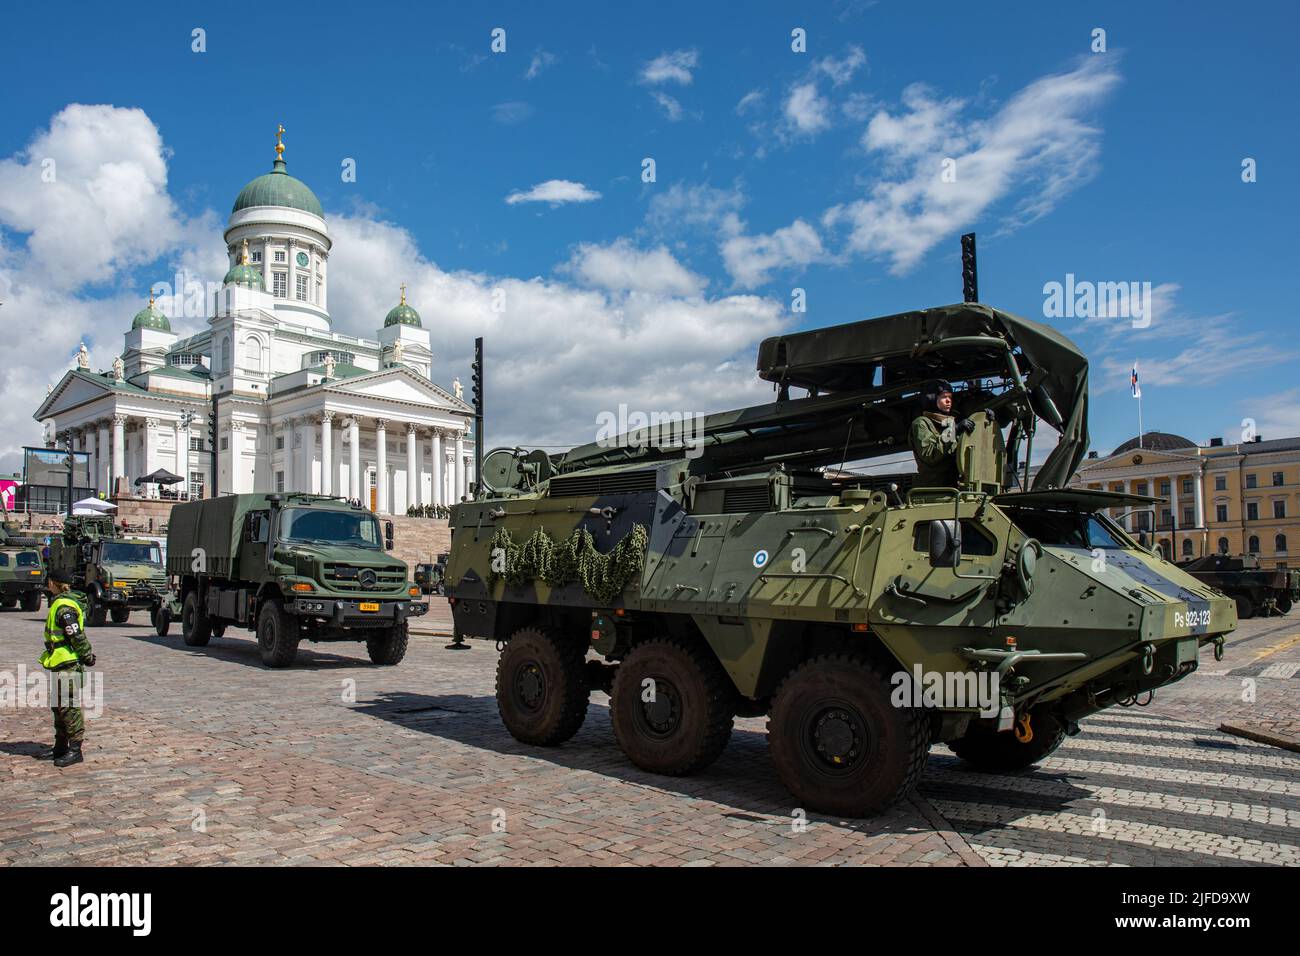 Panssari-Sisu or Pasi, a wheeled armoured personnel carrier at Defence Forces' Flag Day military parade in Senate Square, Helsinki, Finland Stock Photo